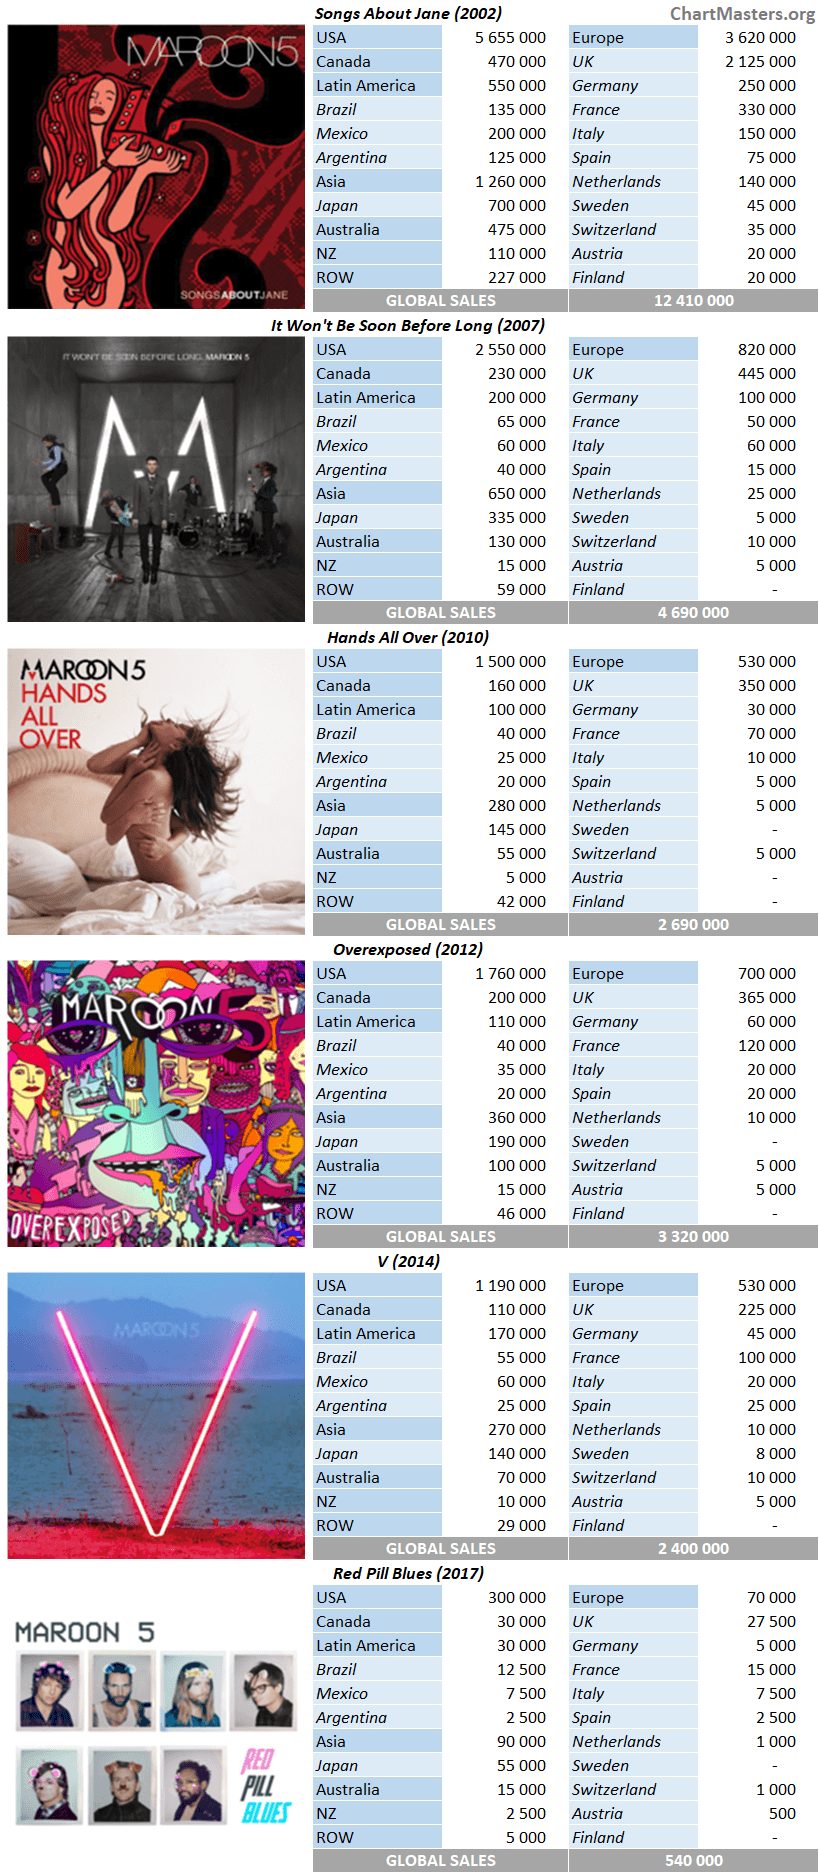 Maroon 5 albums and songs sales as of 2019 - ChartMasters